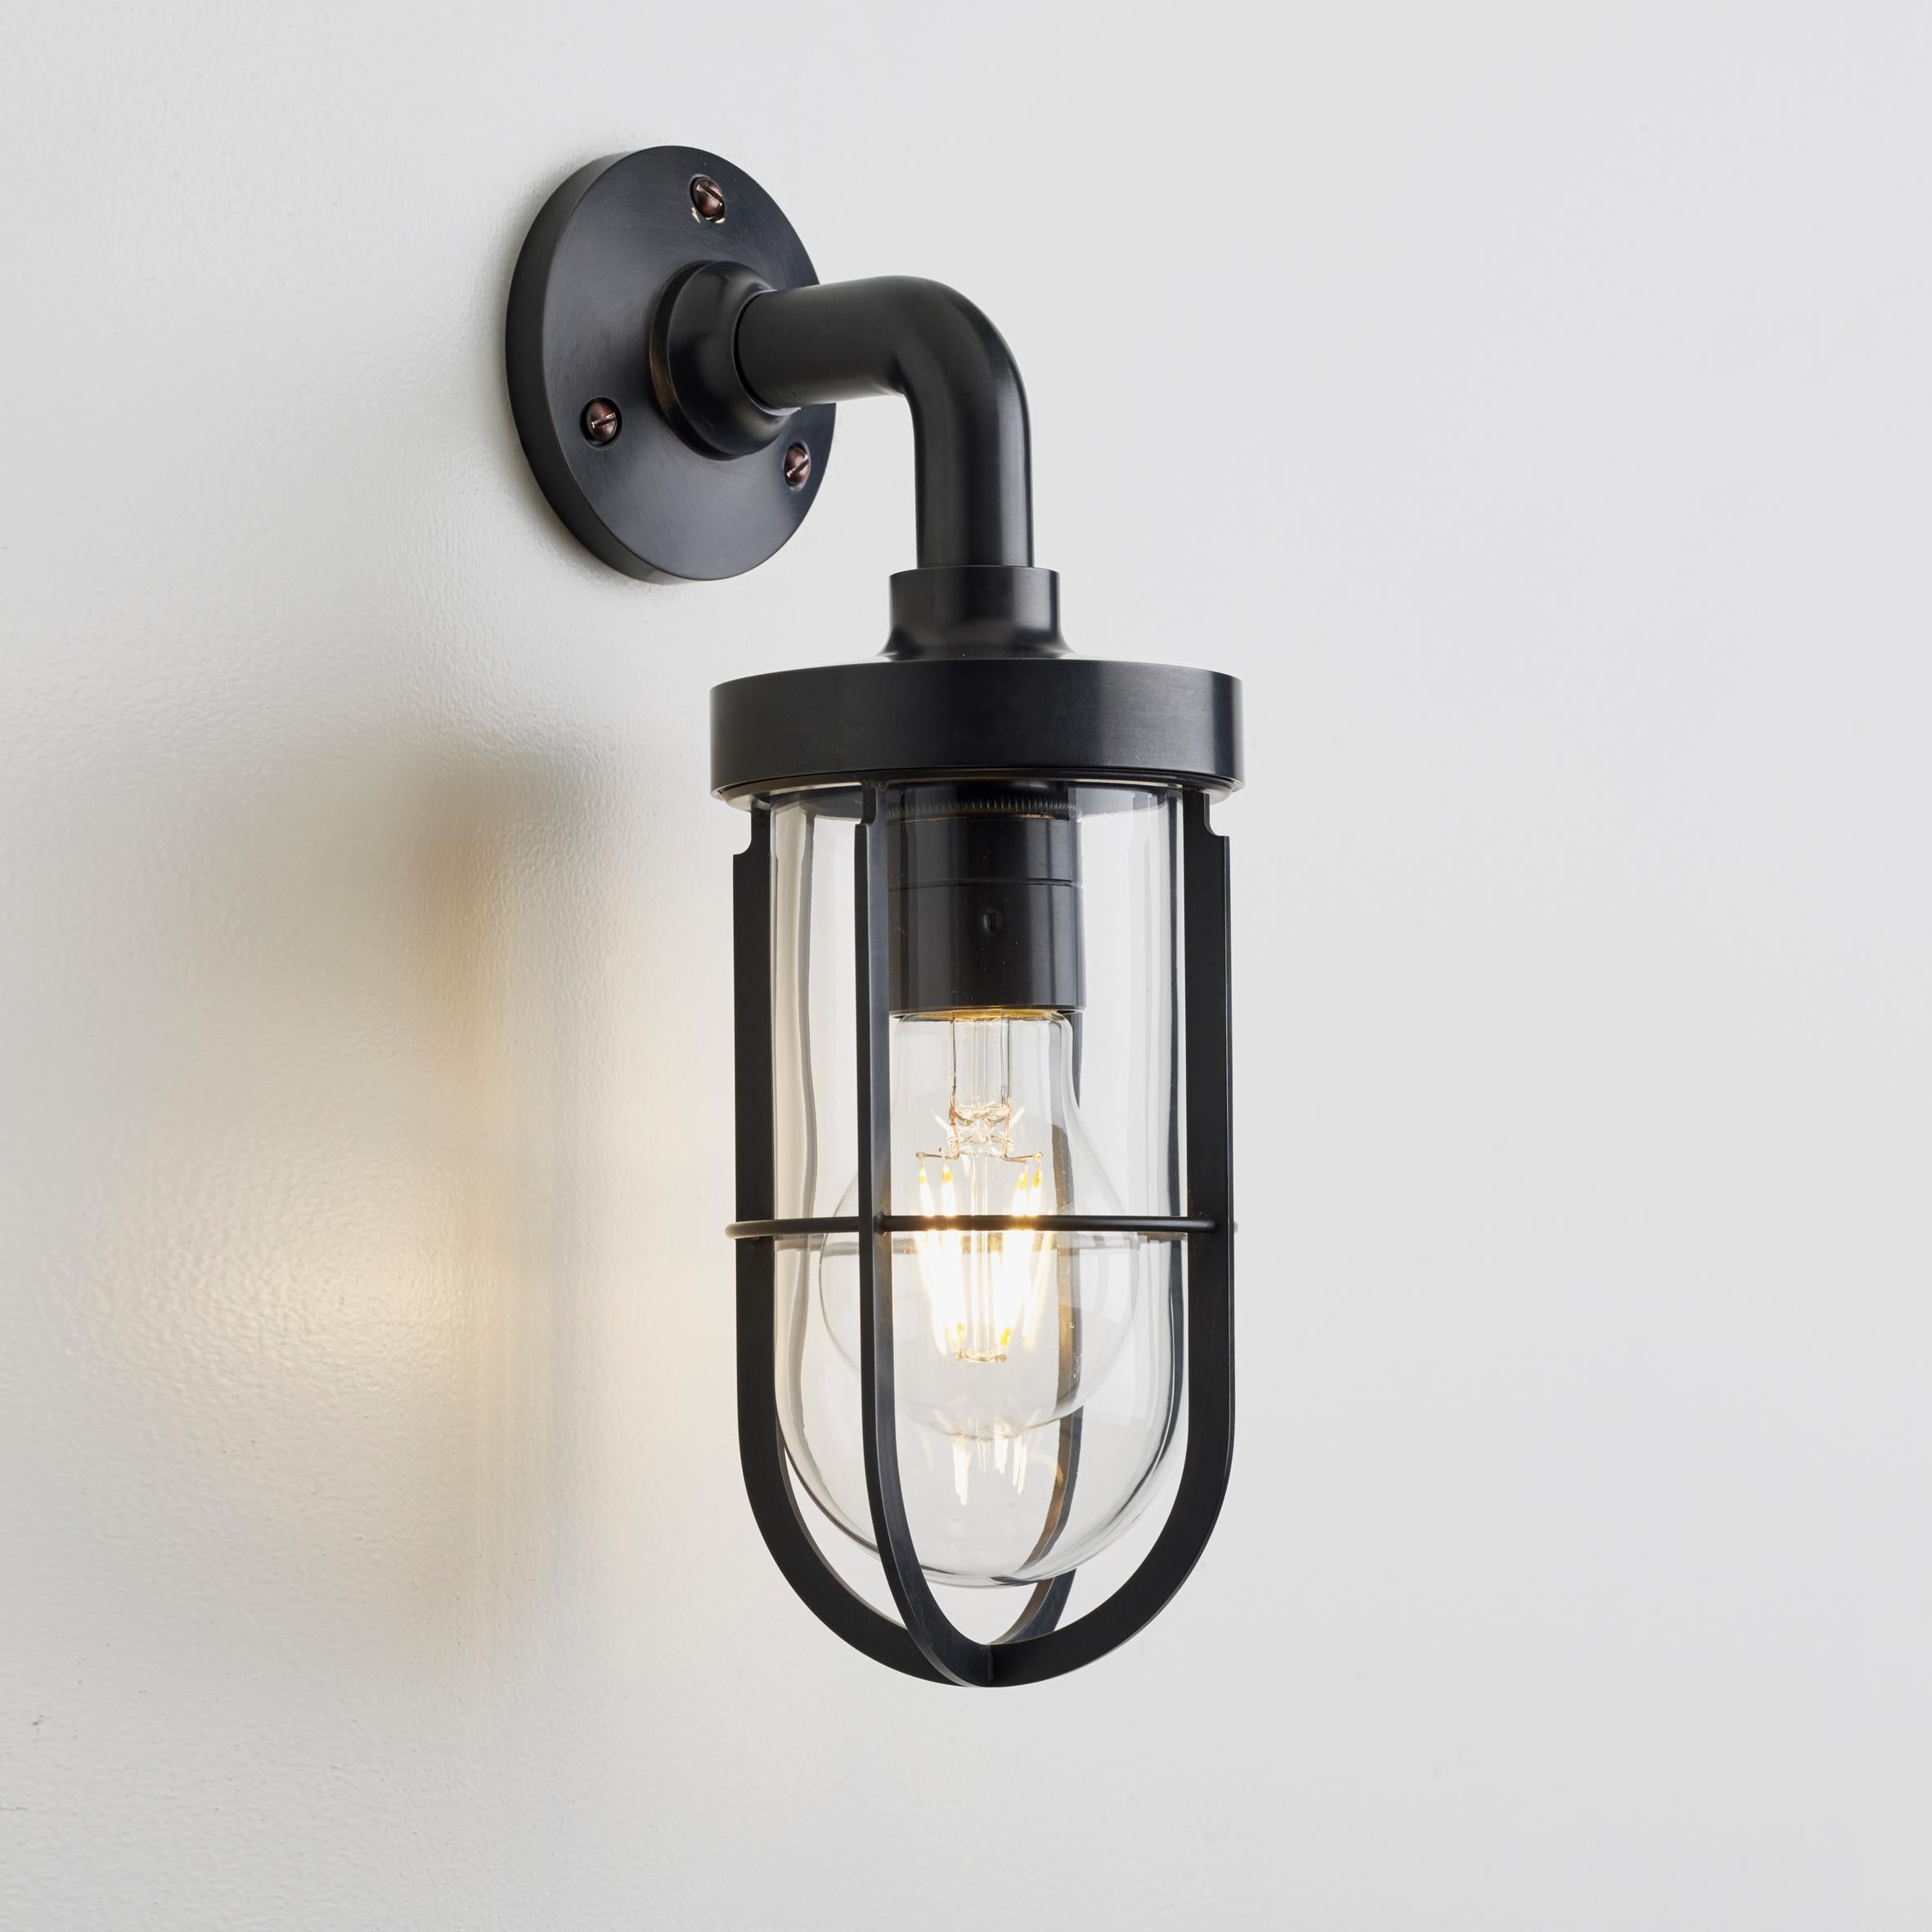 Wall light in solid brass with clear or frosted glass. For indoor and outdoor use (IP44). Note this fixture ships without bulbs which can be sourced from Just bulbs in NYC.

Lamp LED E27 230V 4W 2700K retro A60. Main power 230V 50Hz.